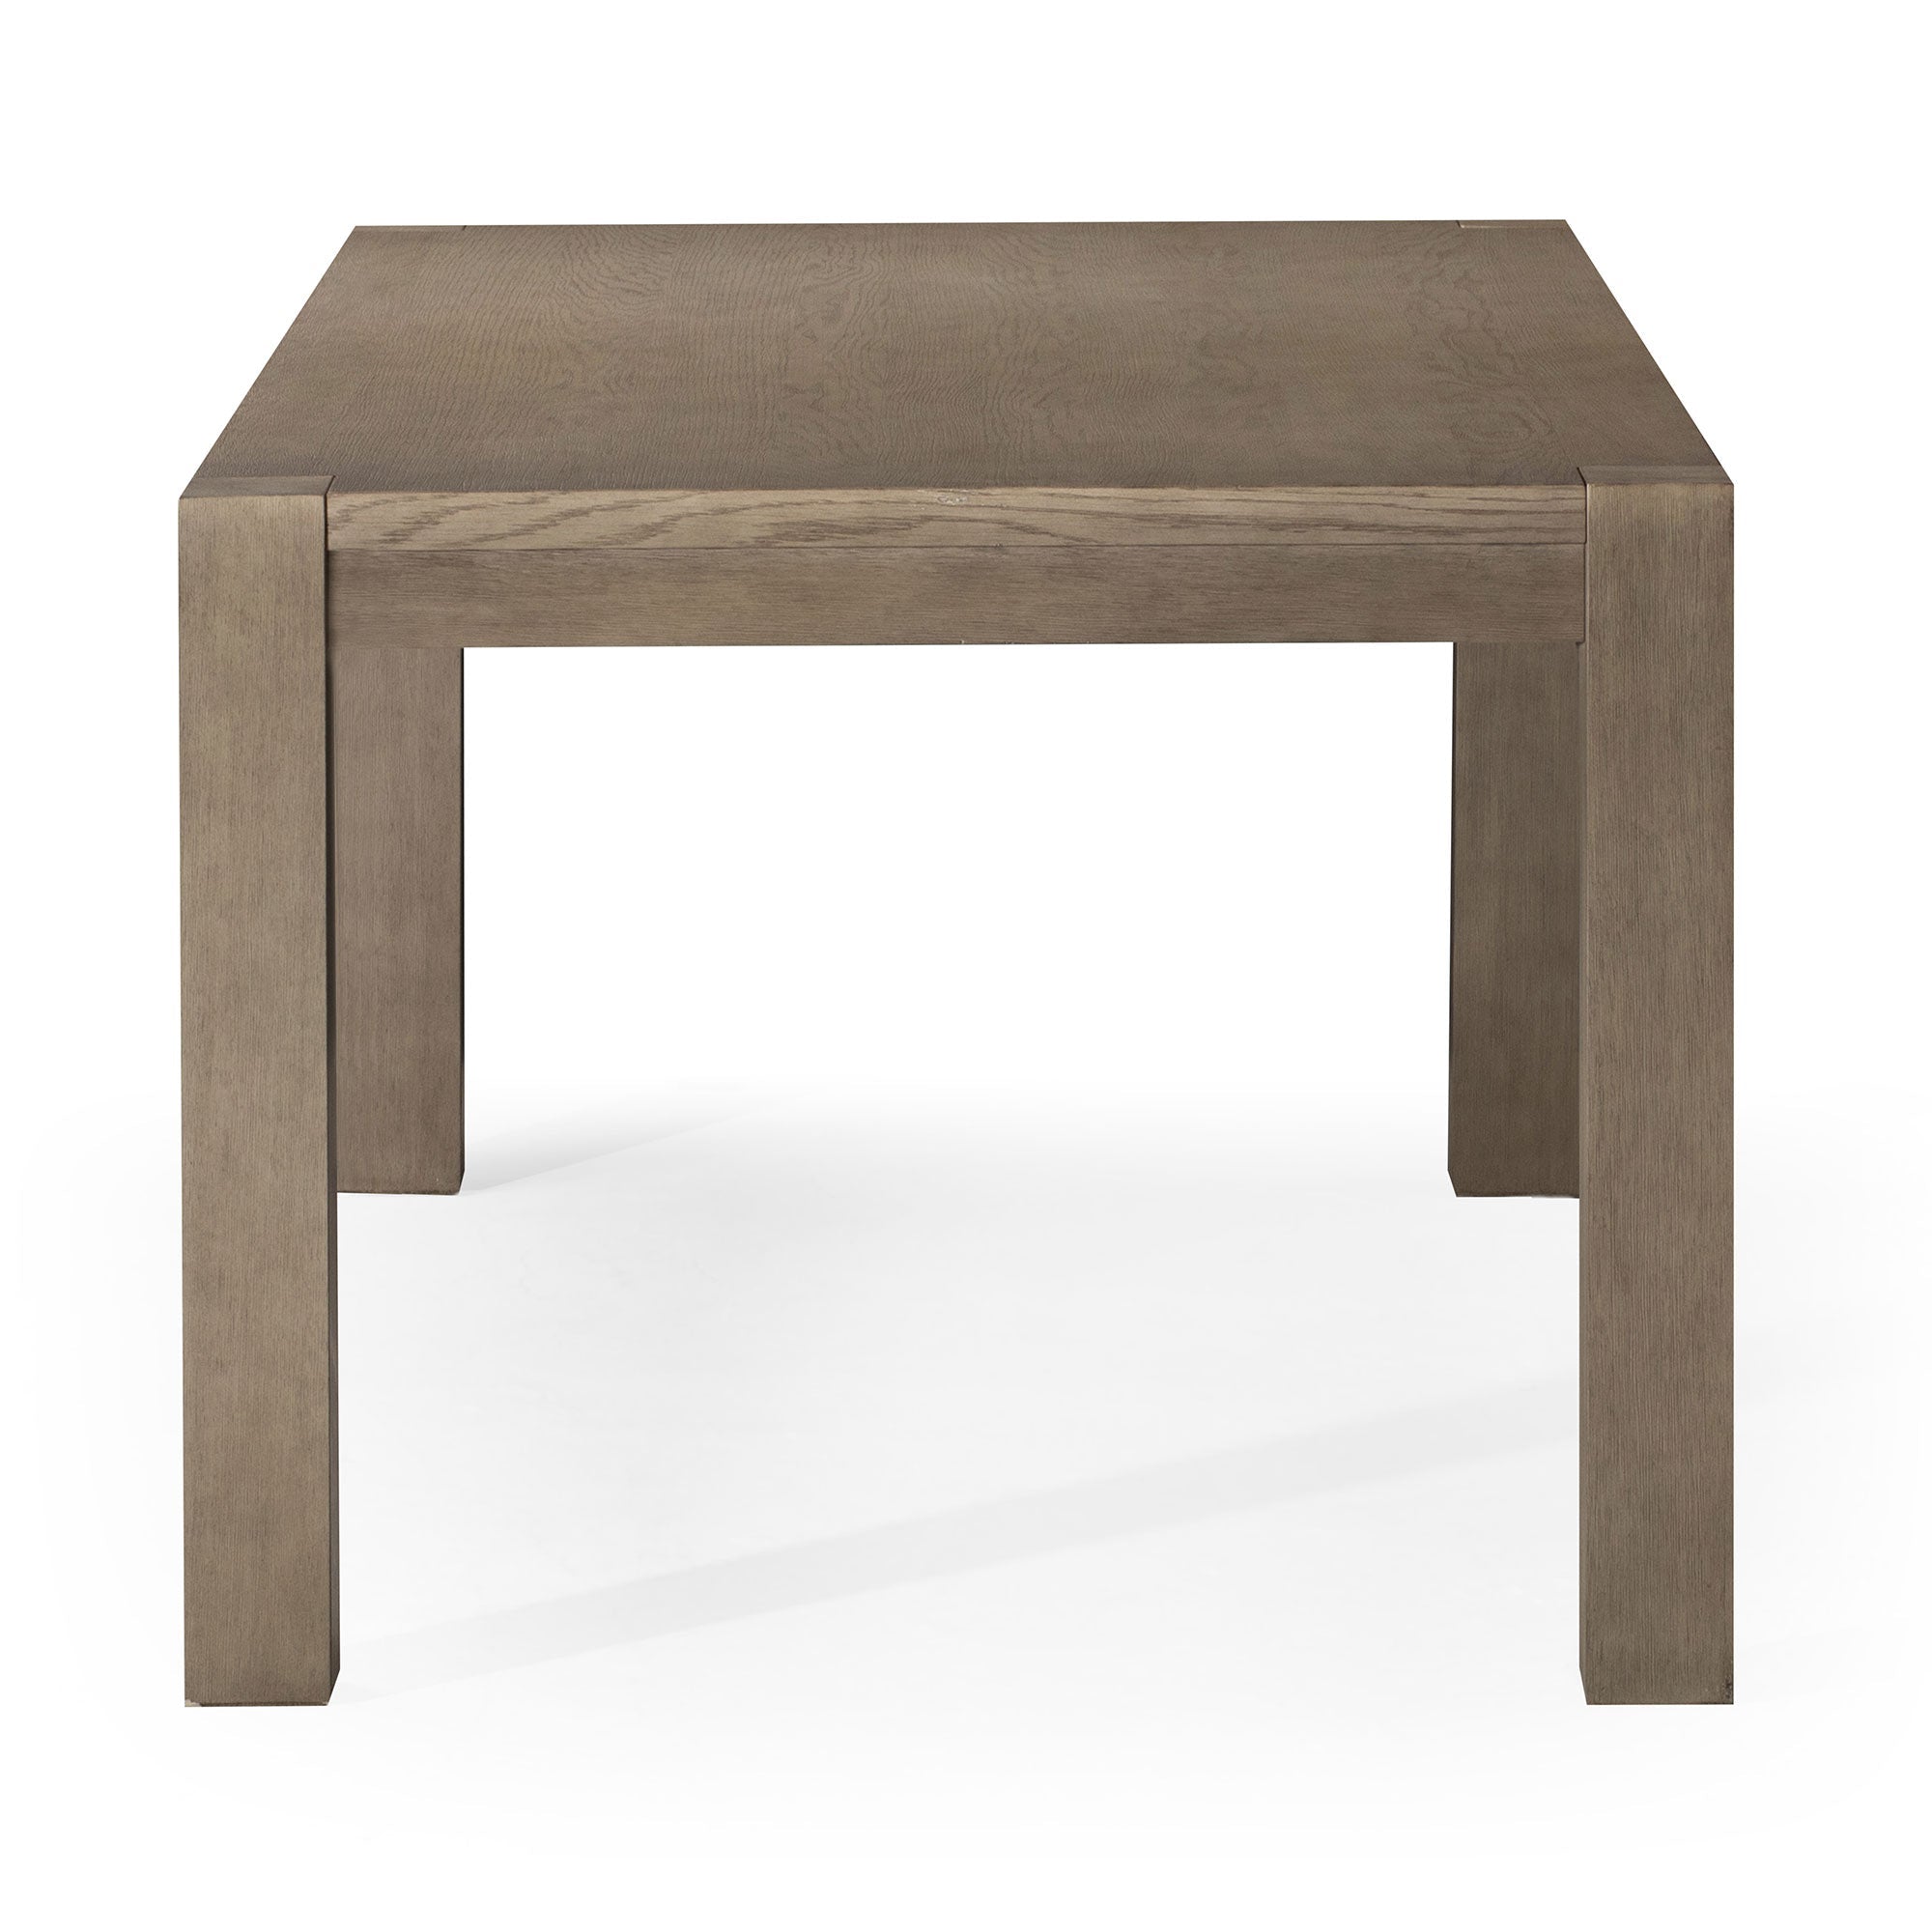 Cleo Contemporary Wooden Dining Table in Refined Grey Finish in Dining Furniture by Maven Lane